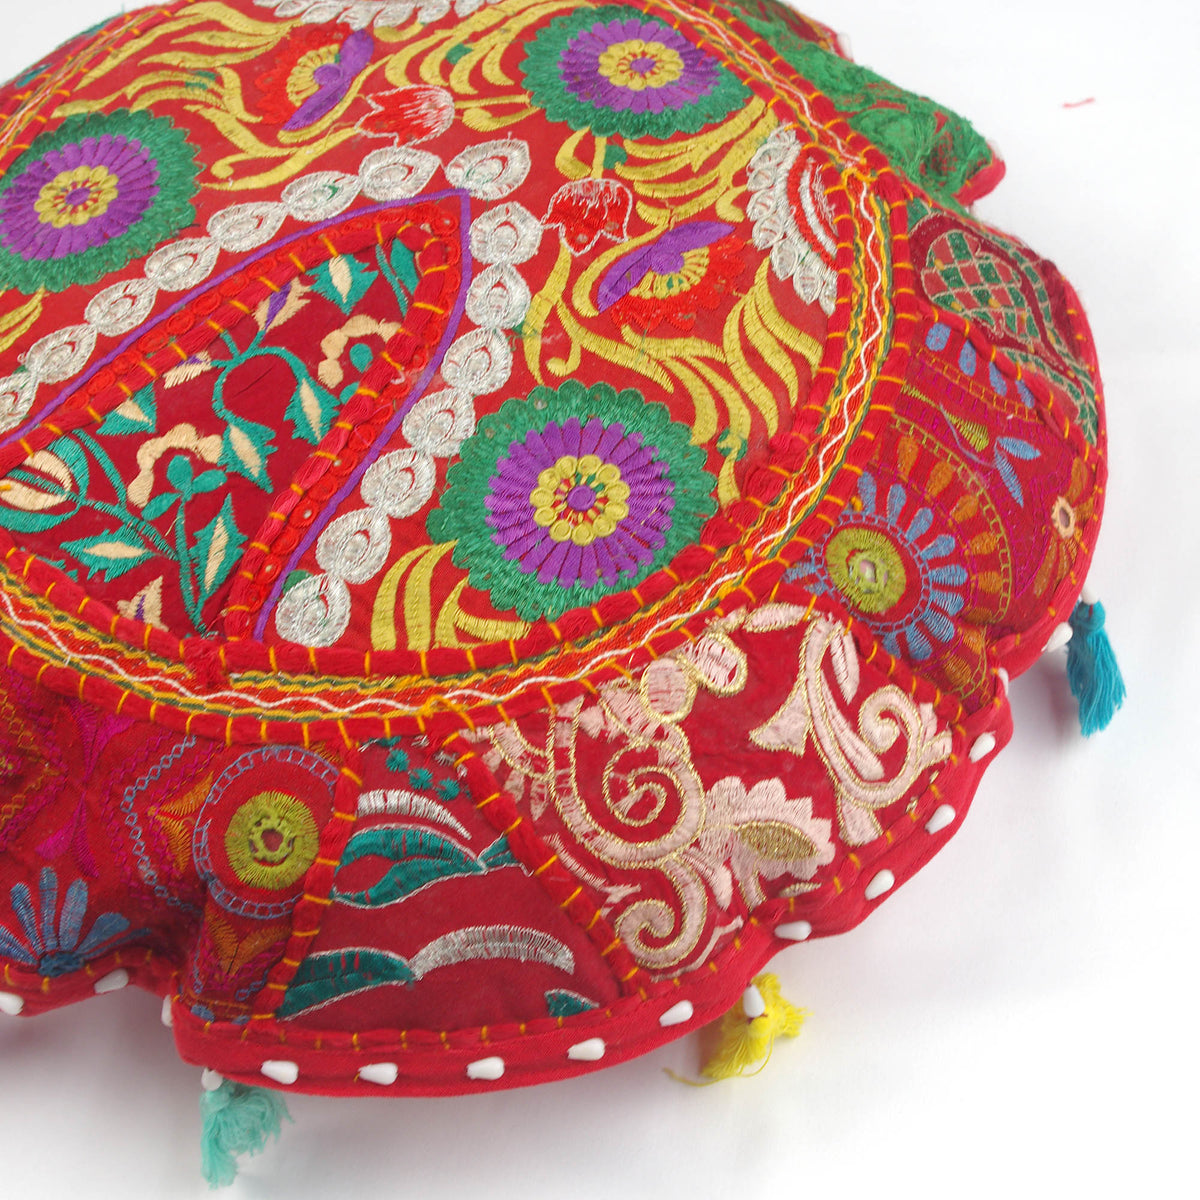 Red Floral Round Floor Embroidered Patchwork Pouf Ottoman Indian Vintage Cushion Cover 18"